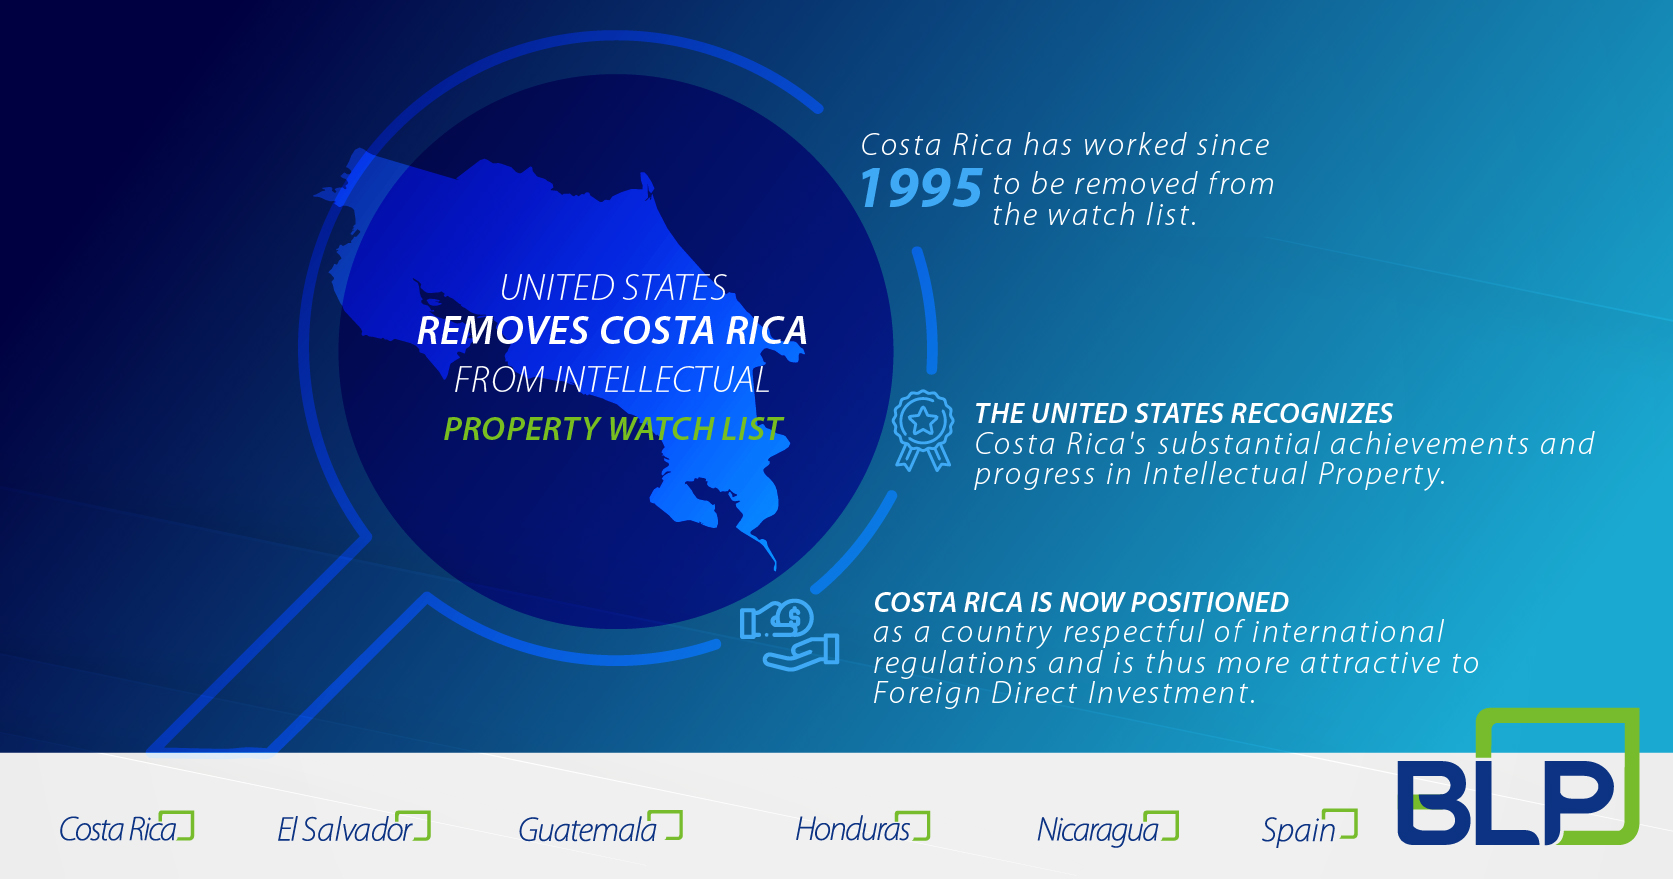 United States Removes Costa Rica from Intellectual Property Watch List